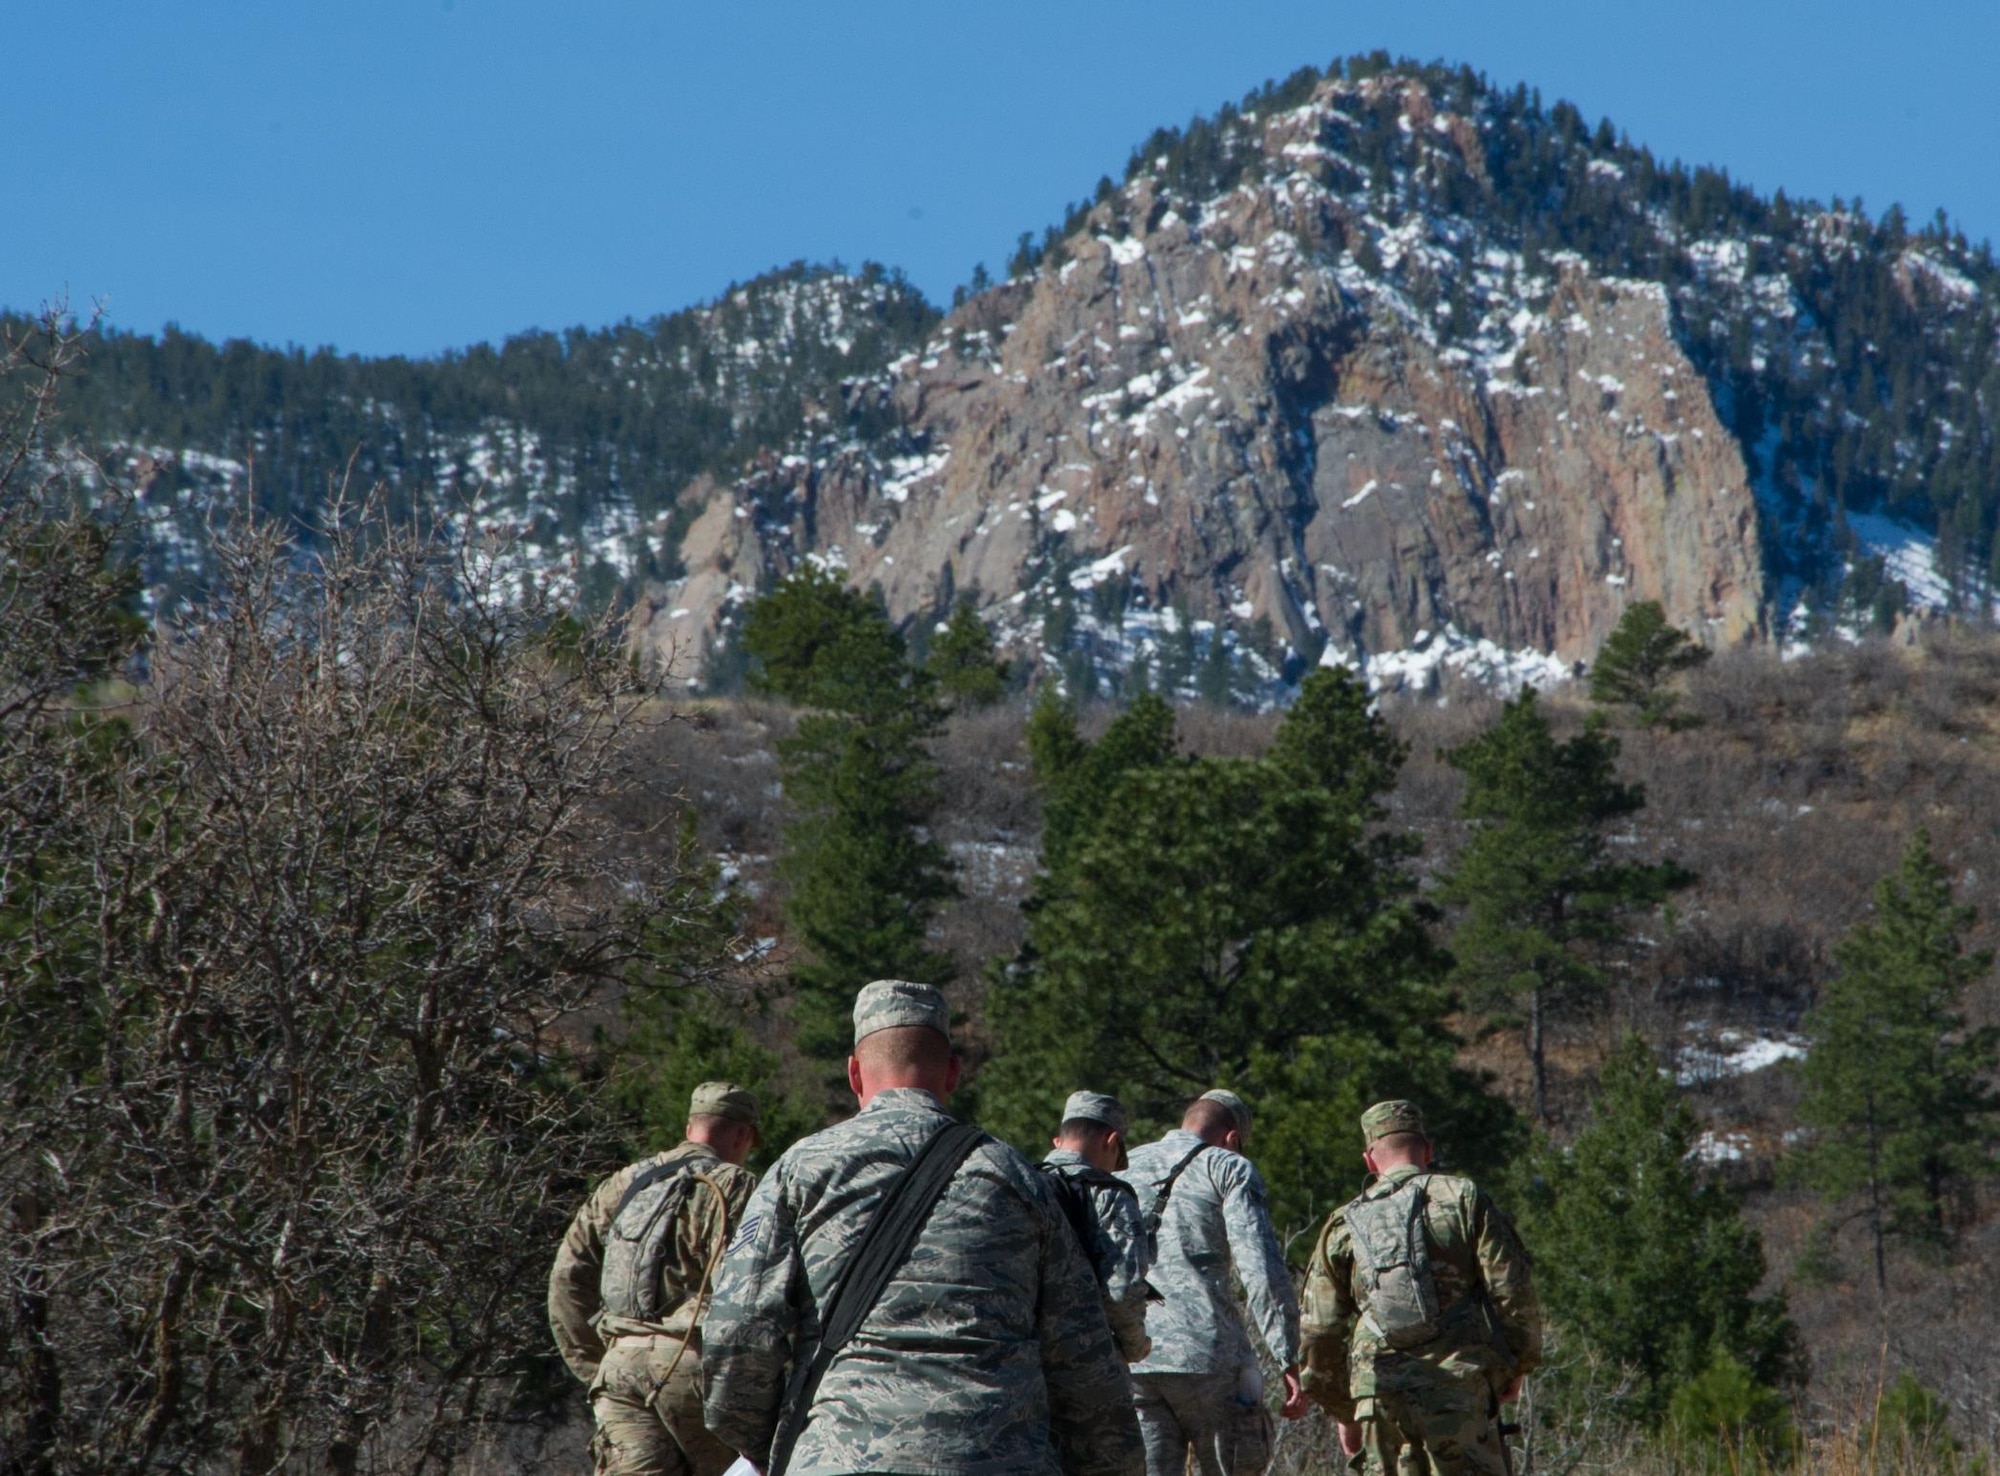 SCHREIVER AIR FORCE BASE, Colo. -- After conducting drills to prepare for their day, Security Forces Airmen head back to camp to gear up for a practice combat situation during the 2017 Reduced Combat Leaders Course, held at the U.S. Air Force Academy in Colorado, on Friday, Apr. 7th, 2017. The course provides seven days of classroom and field training exercises that focus on developing combat leadership skills of junior non-commissioned officers and company grade officers in the Security Forces career field. (U.S. Air Force photo/Senior Airman Laura Turner)